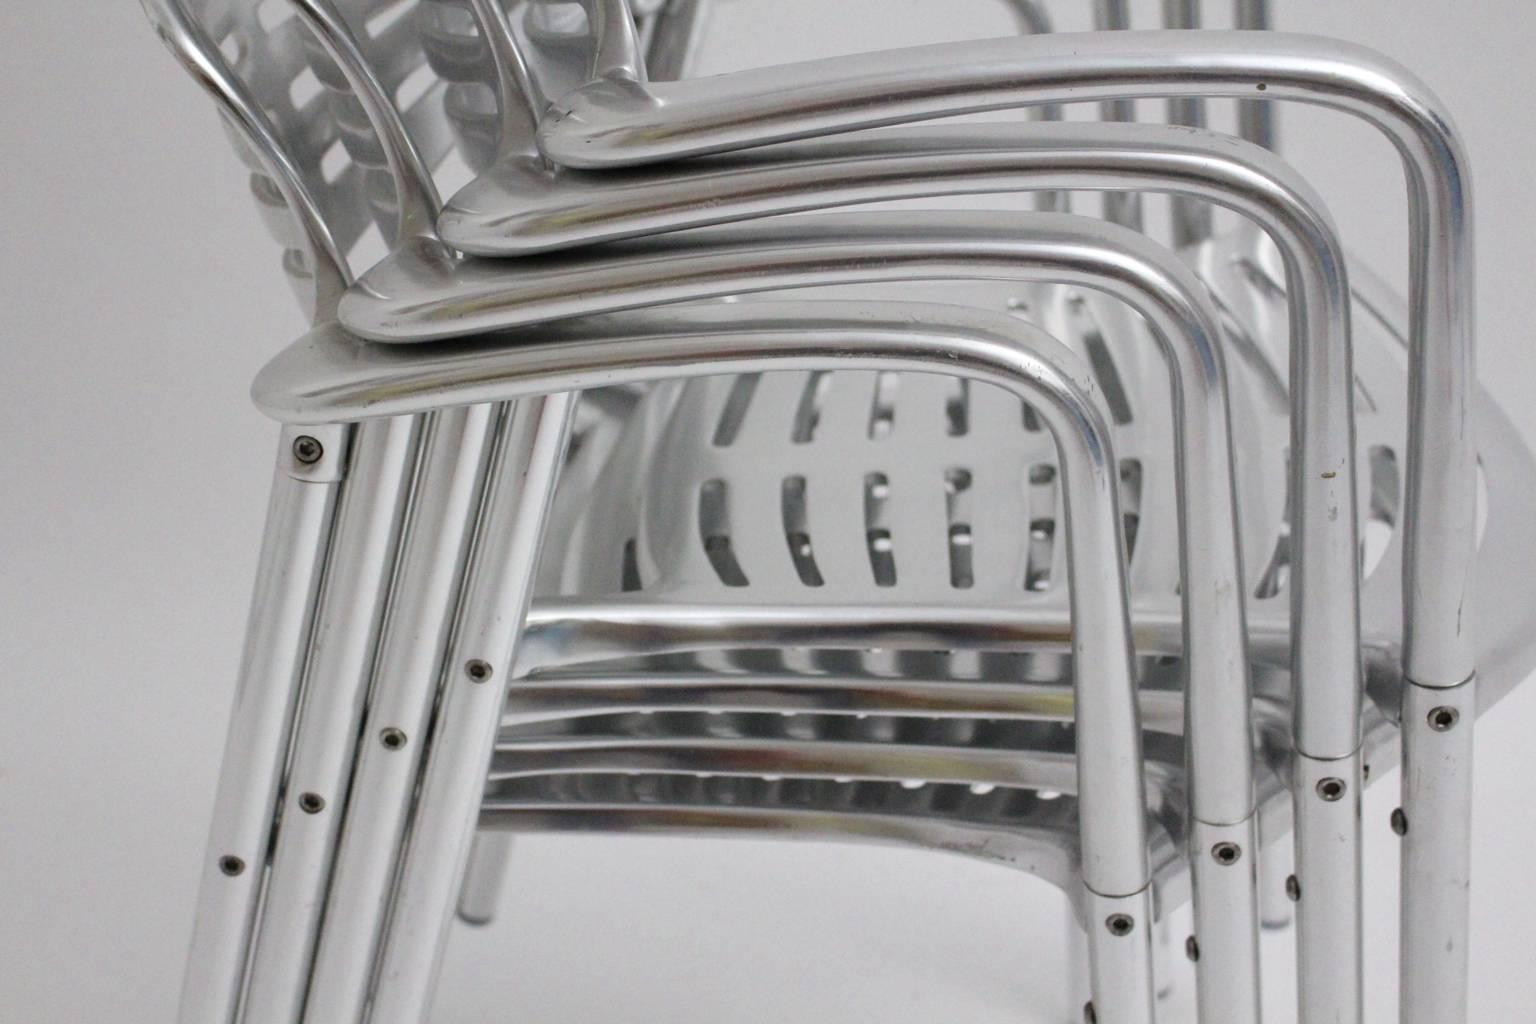 Modern Aluminum Stacking Chairs Garden Chairs Dining Chairs Jorge Pensi 1980s For Sale 1